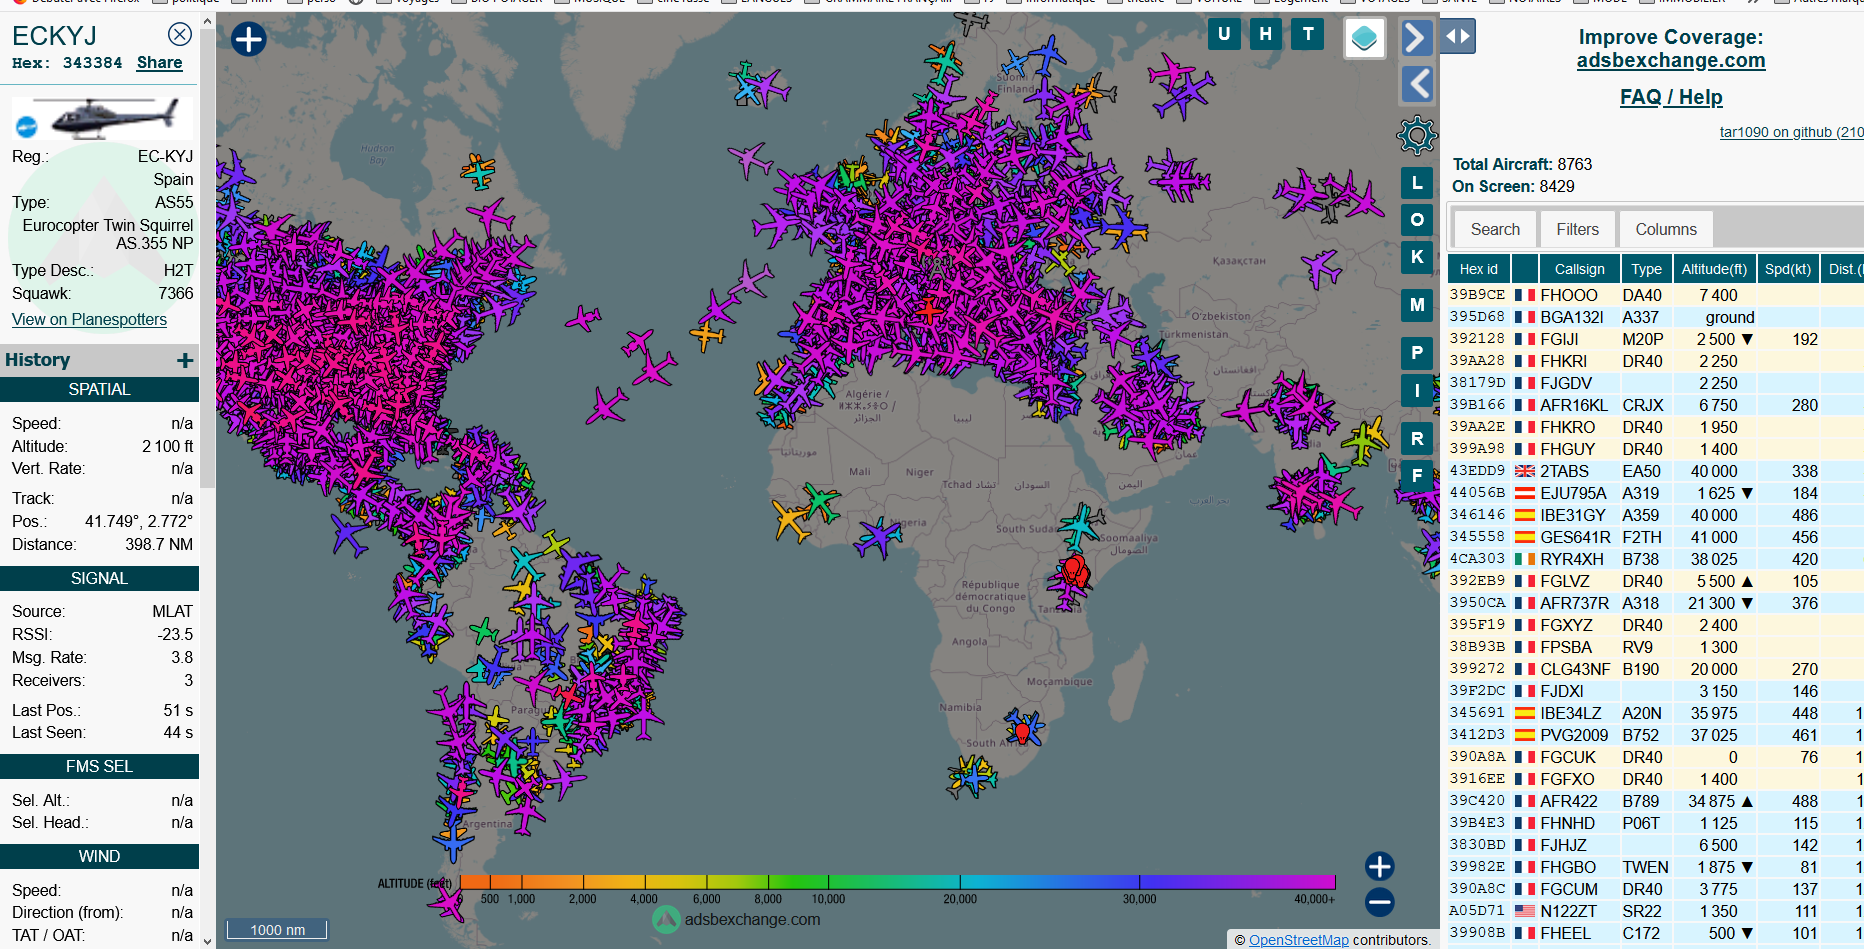 ADS-B Exchange - tracking 8756 aircraft - Mozilla Firefox 26_02_2021 16_58_33 - Copie (2).png